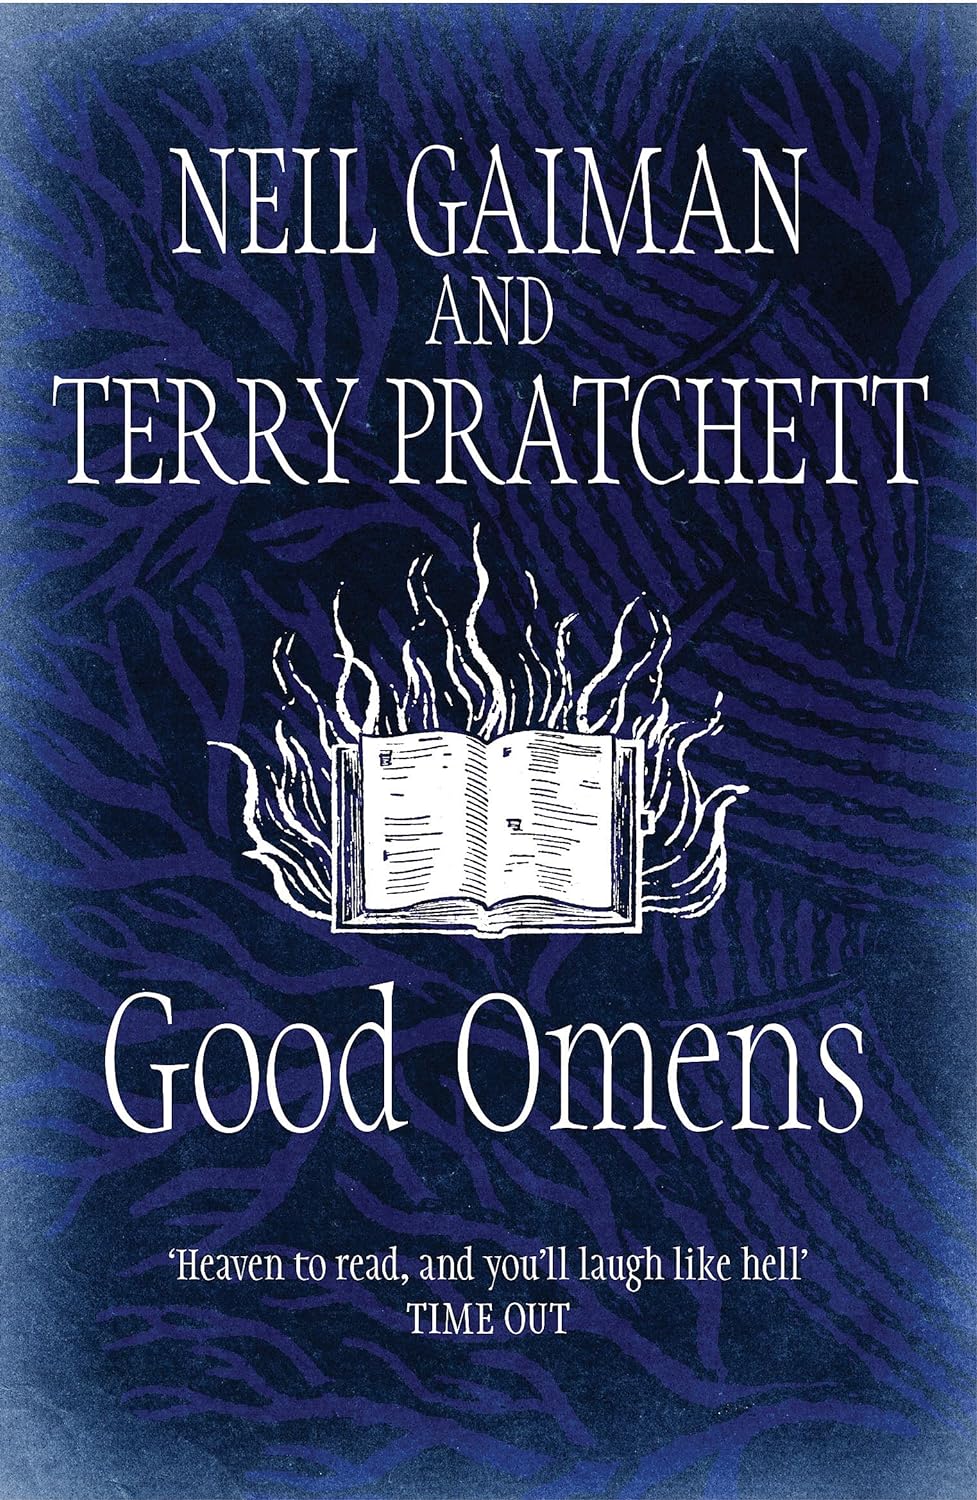 “Good Omens: The Nice and Accurate Prophecies of Agnes Nutter, Witch” by Neil Gaiman and Terry Pratchett (1990)